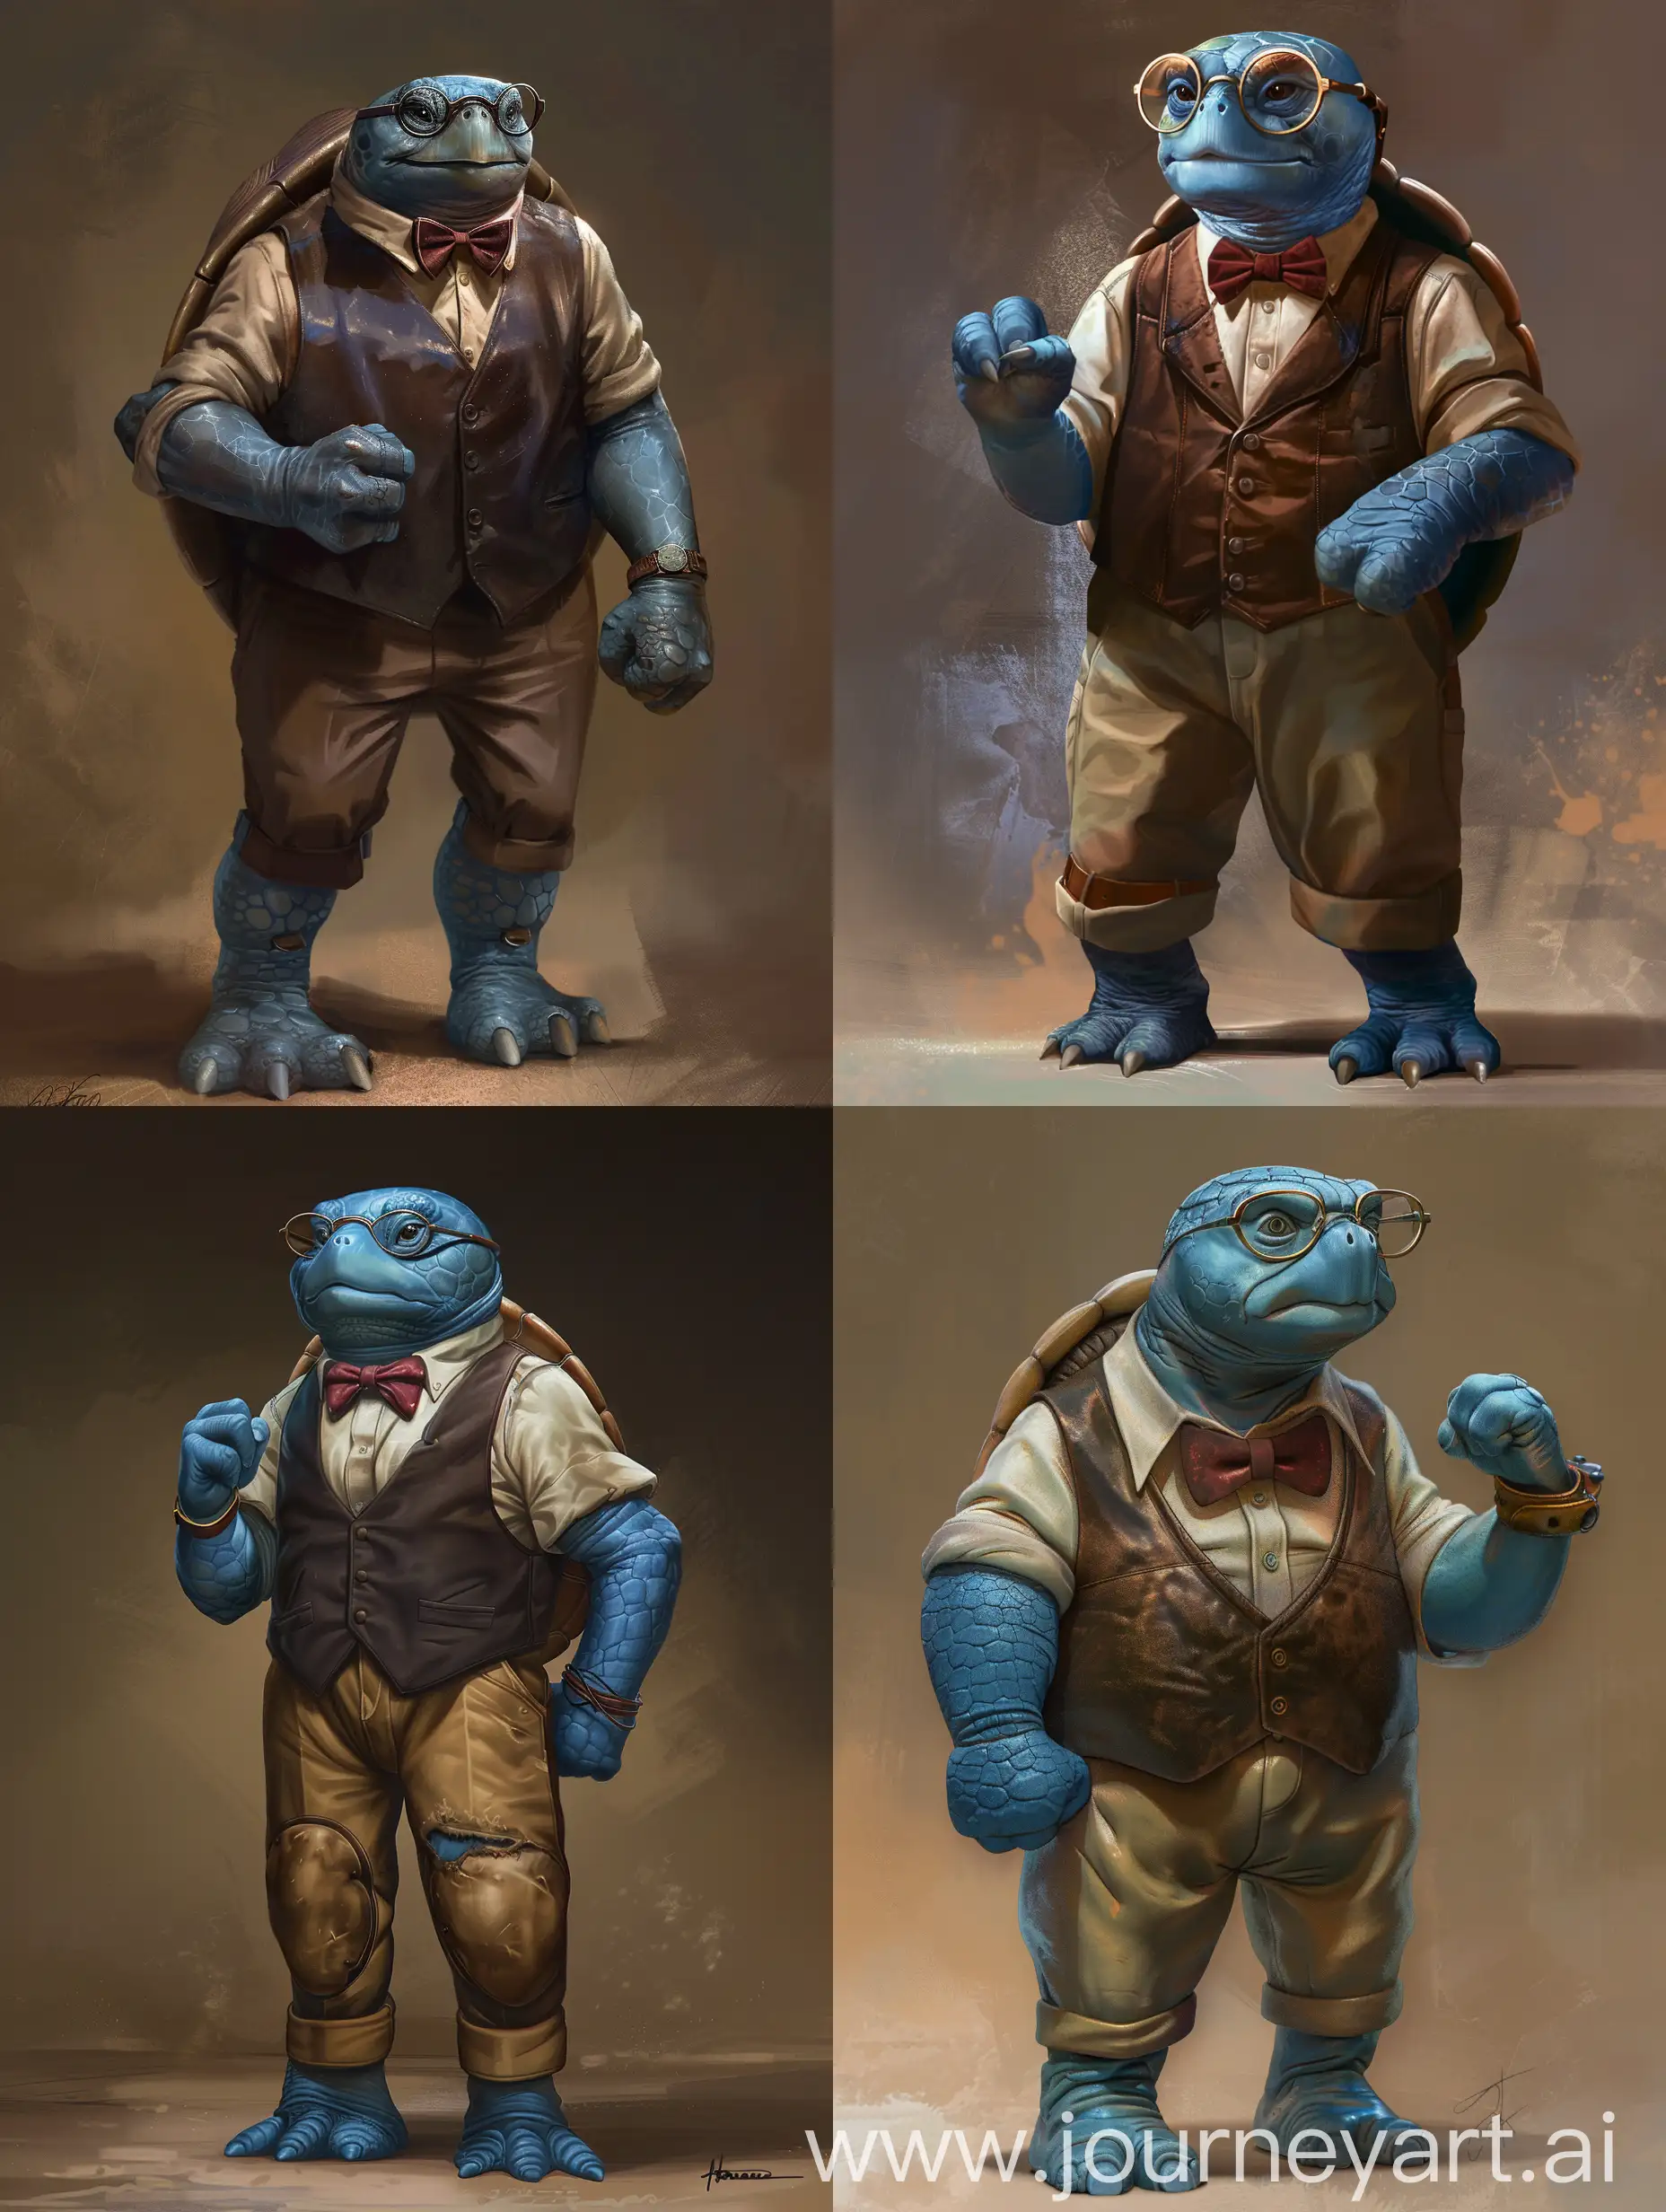 /imagine prompt: A character study of an intellectual blue turtle in sophisticated attire, featuring sepia pants, an alabaster shirt, a leather-brown vest, and a bowtie in deep carmine. His shell is polished and visible, glasses squarely on, with a hand curled into a fist signifying resolution. Created Using: CGI aesthetic, layered color depth, clarity in expression, nuanced shell textures, digital painting techniques, ambient light casting soft shadows --ar 3:4 --v 6.0